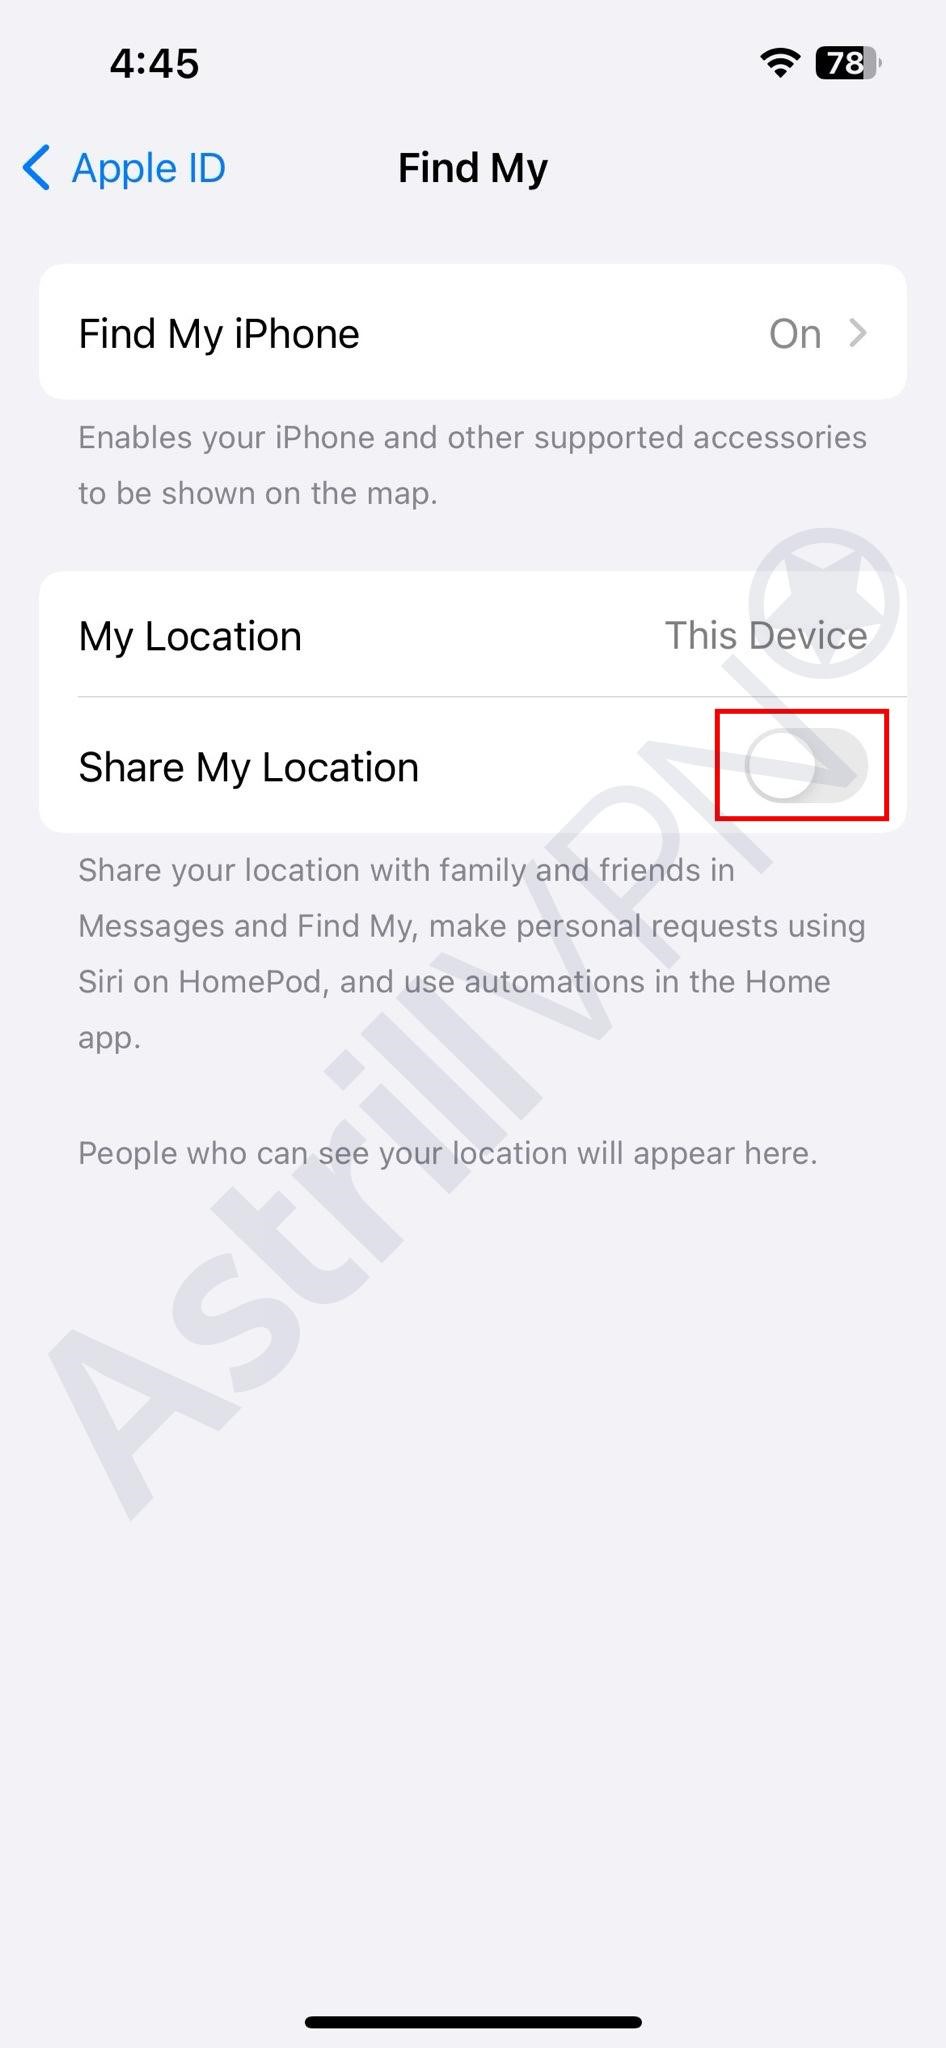 Enable “Share My Location